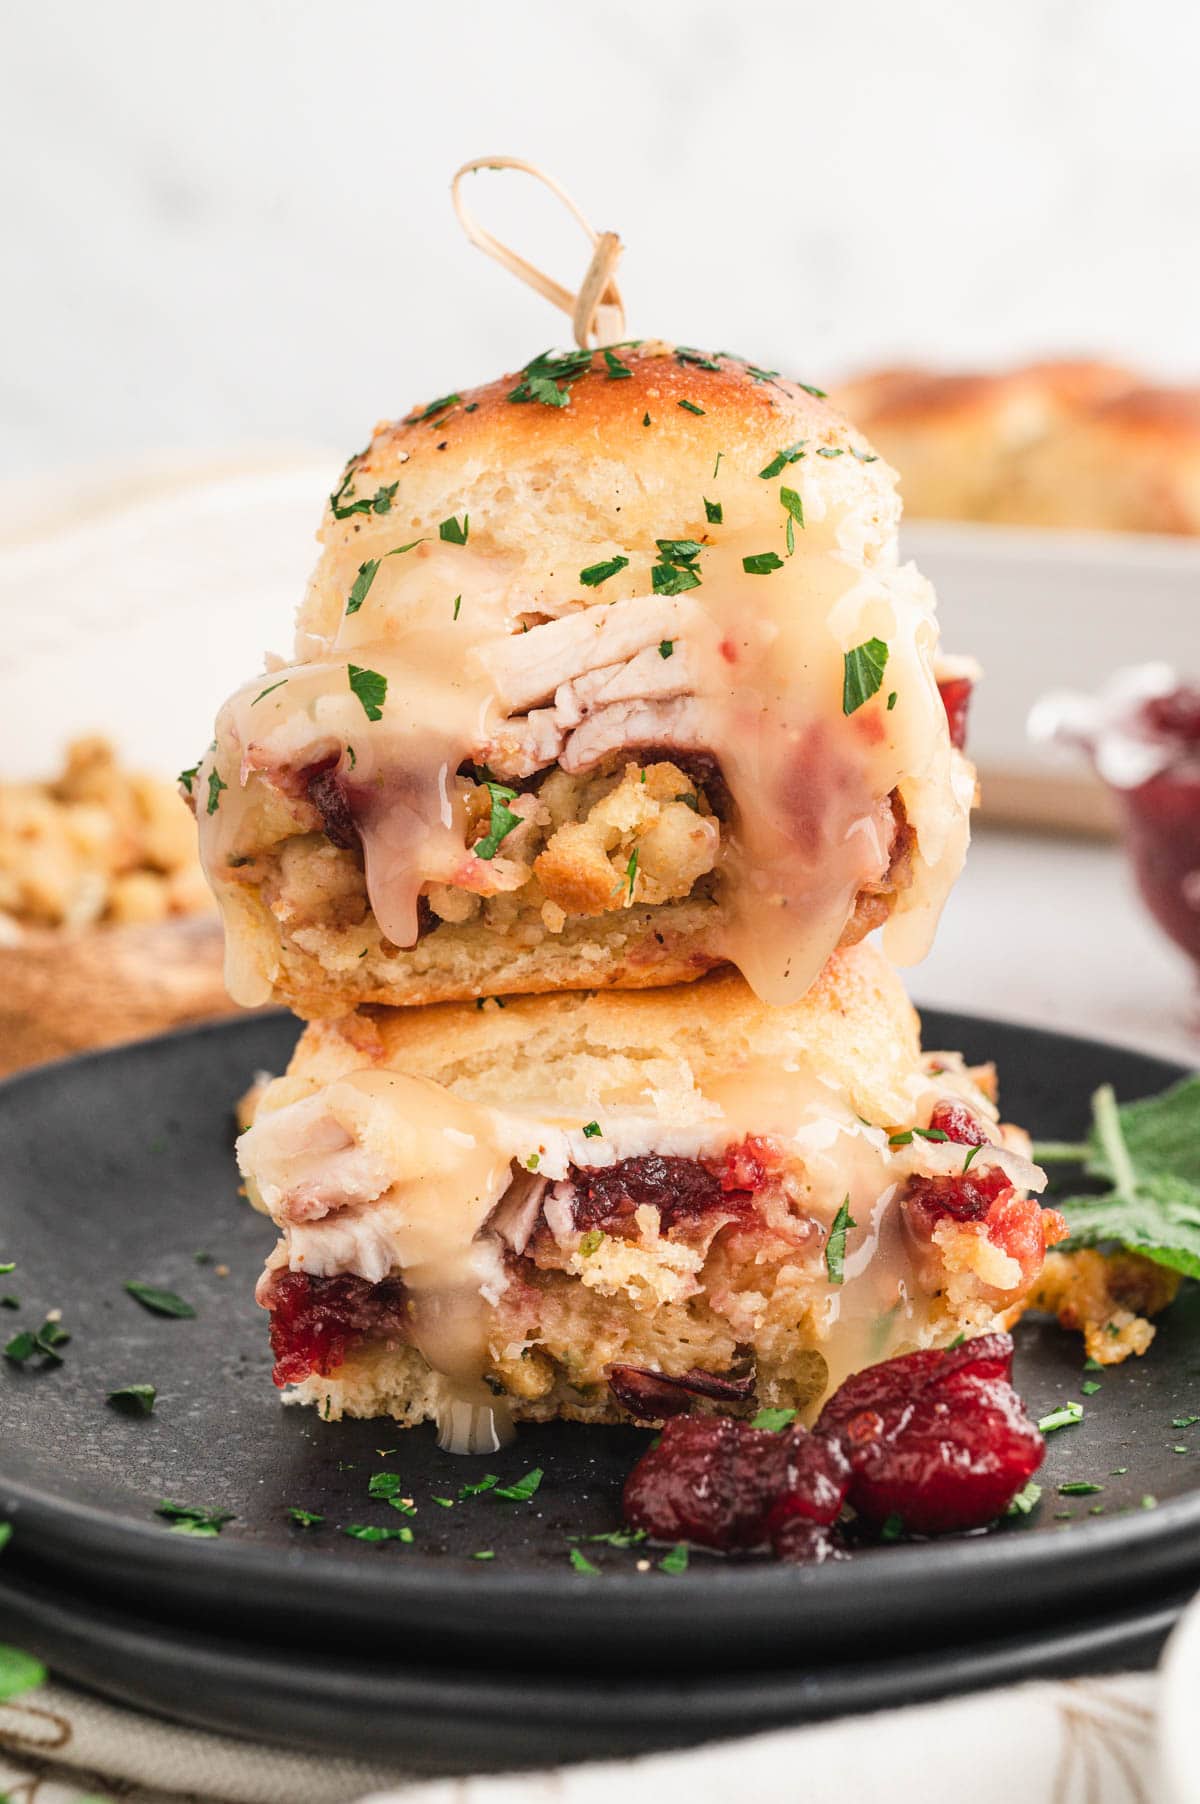 Two sliders with turkey, cranberry and stuffing stacked on top of each other.